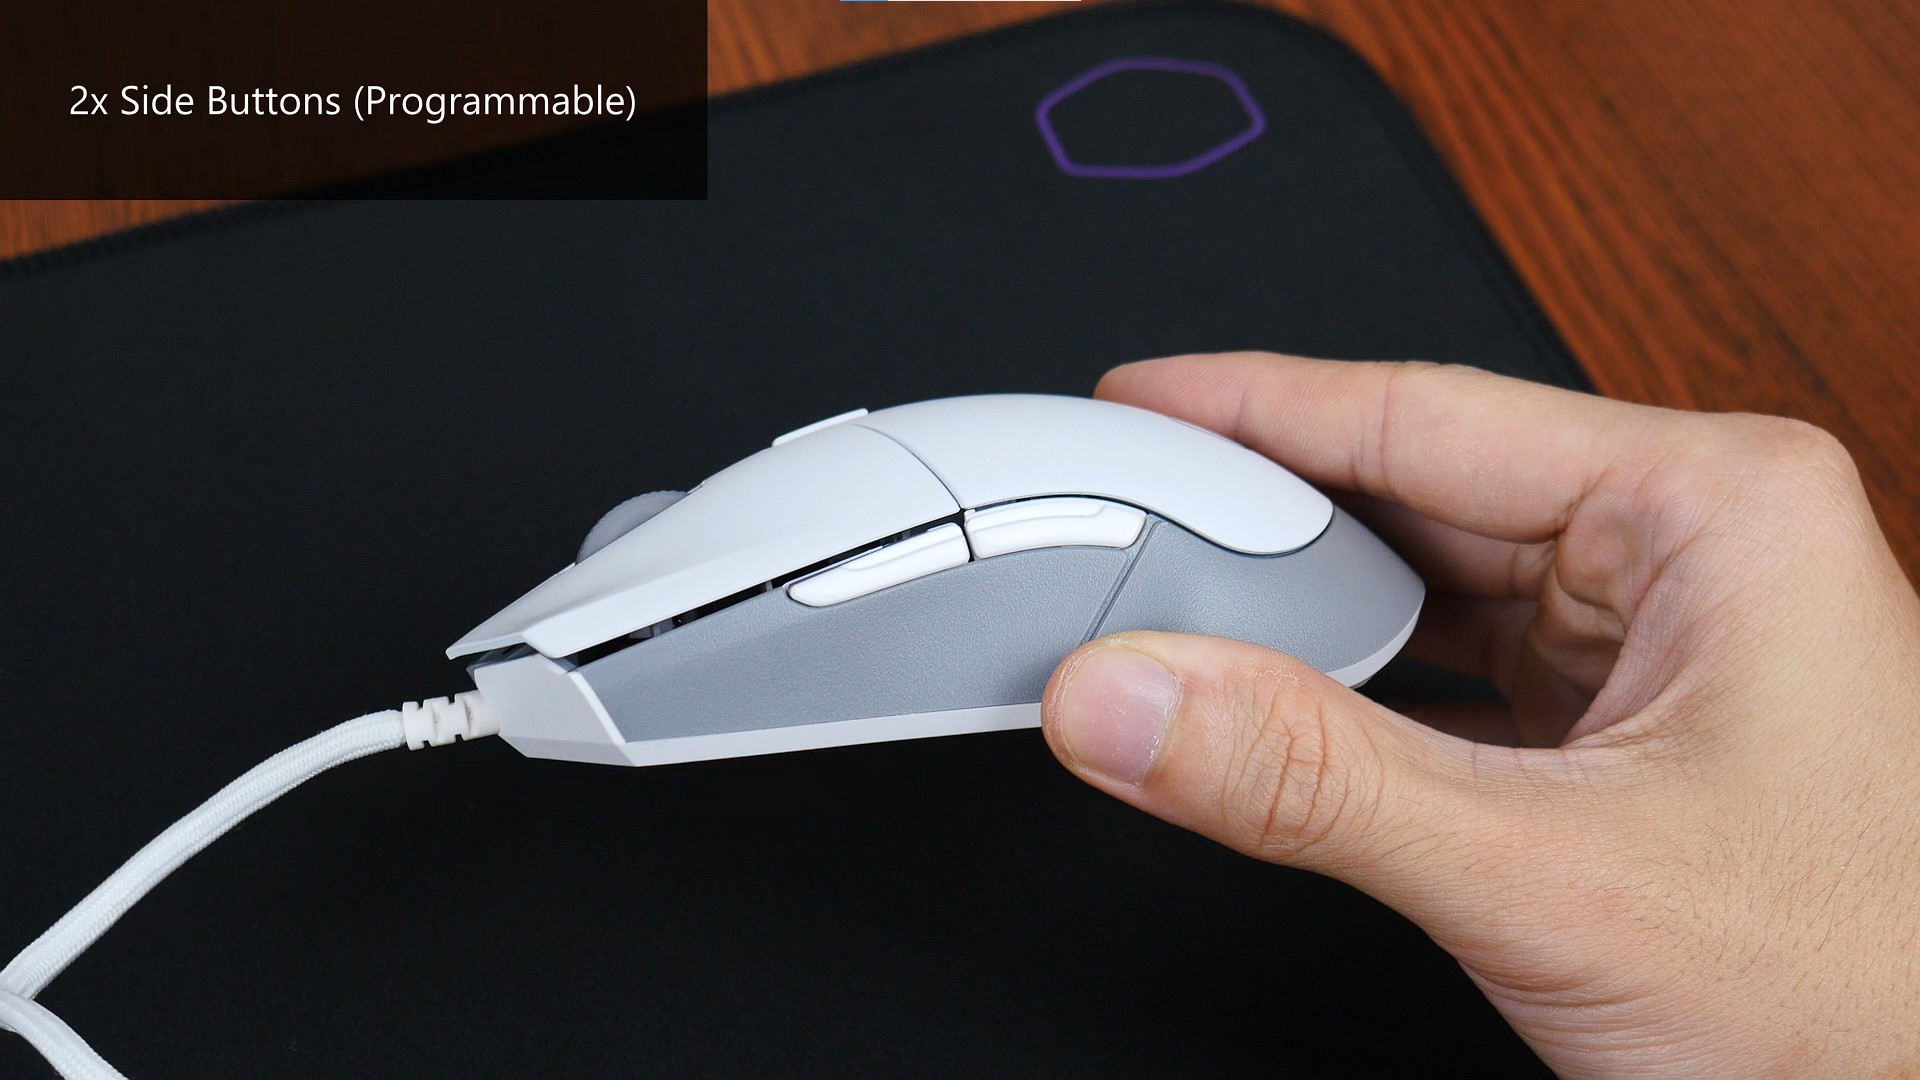 Review: Cooler Master MM310 Wired Gaming Mouse